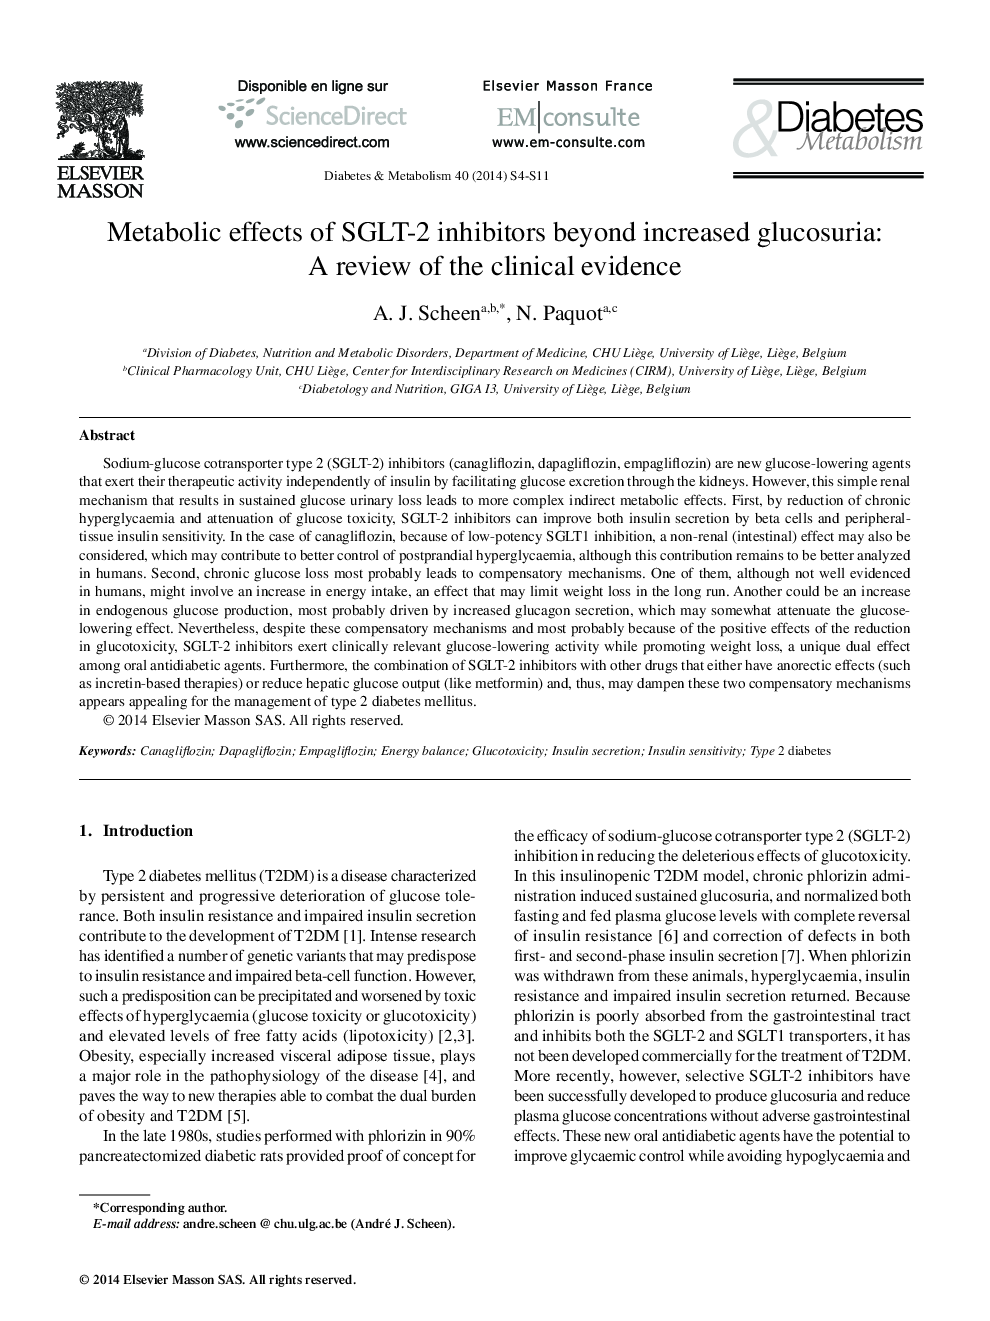 Metabolic effects of SGLT-2 inhibitors beyond increased glucosuria: A review of the clinical evidence